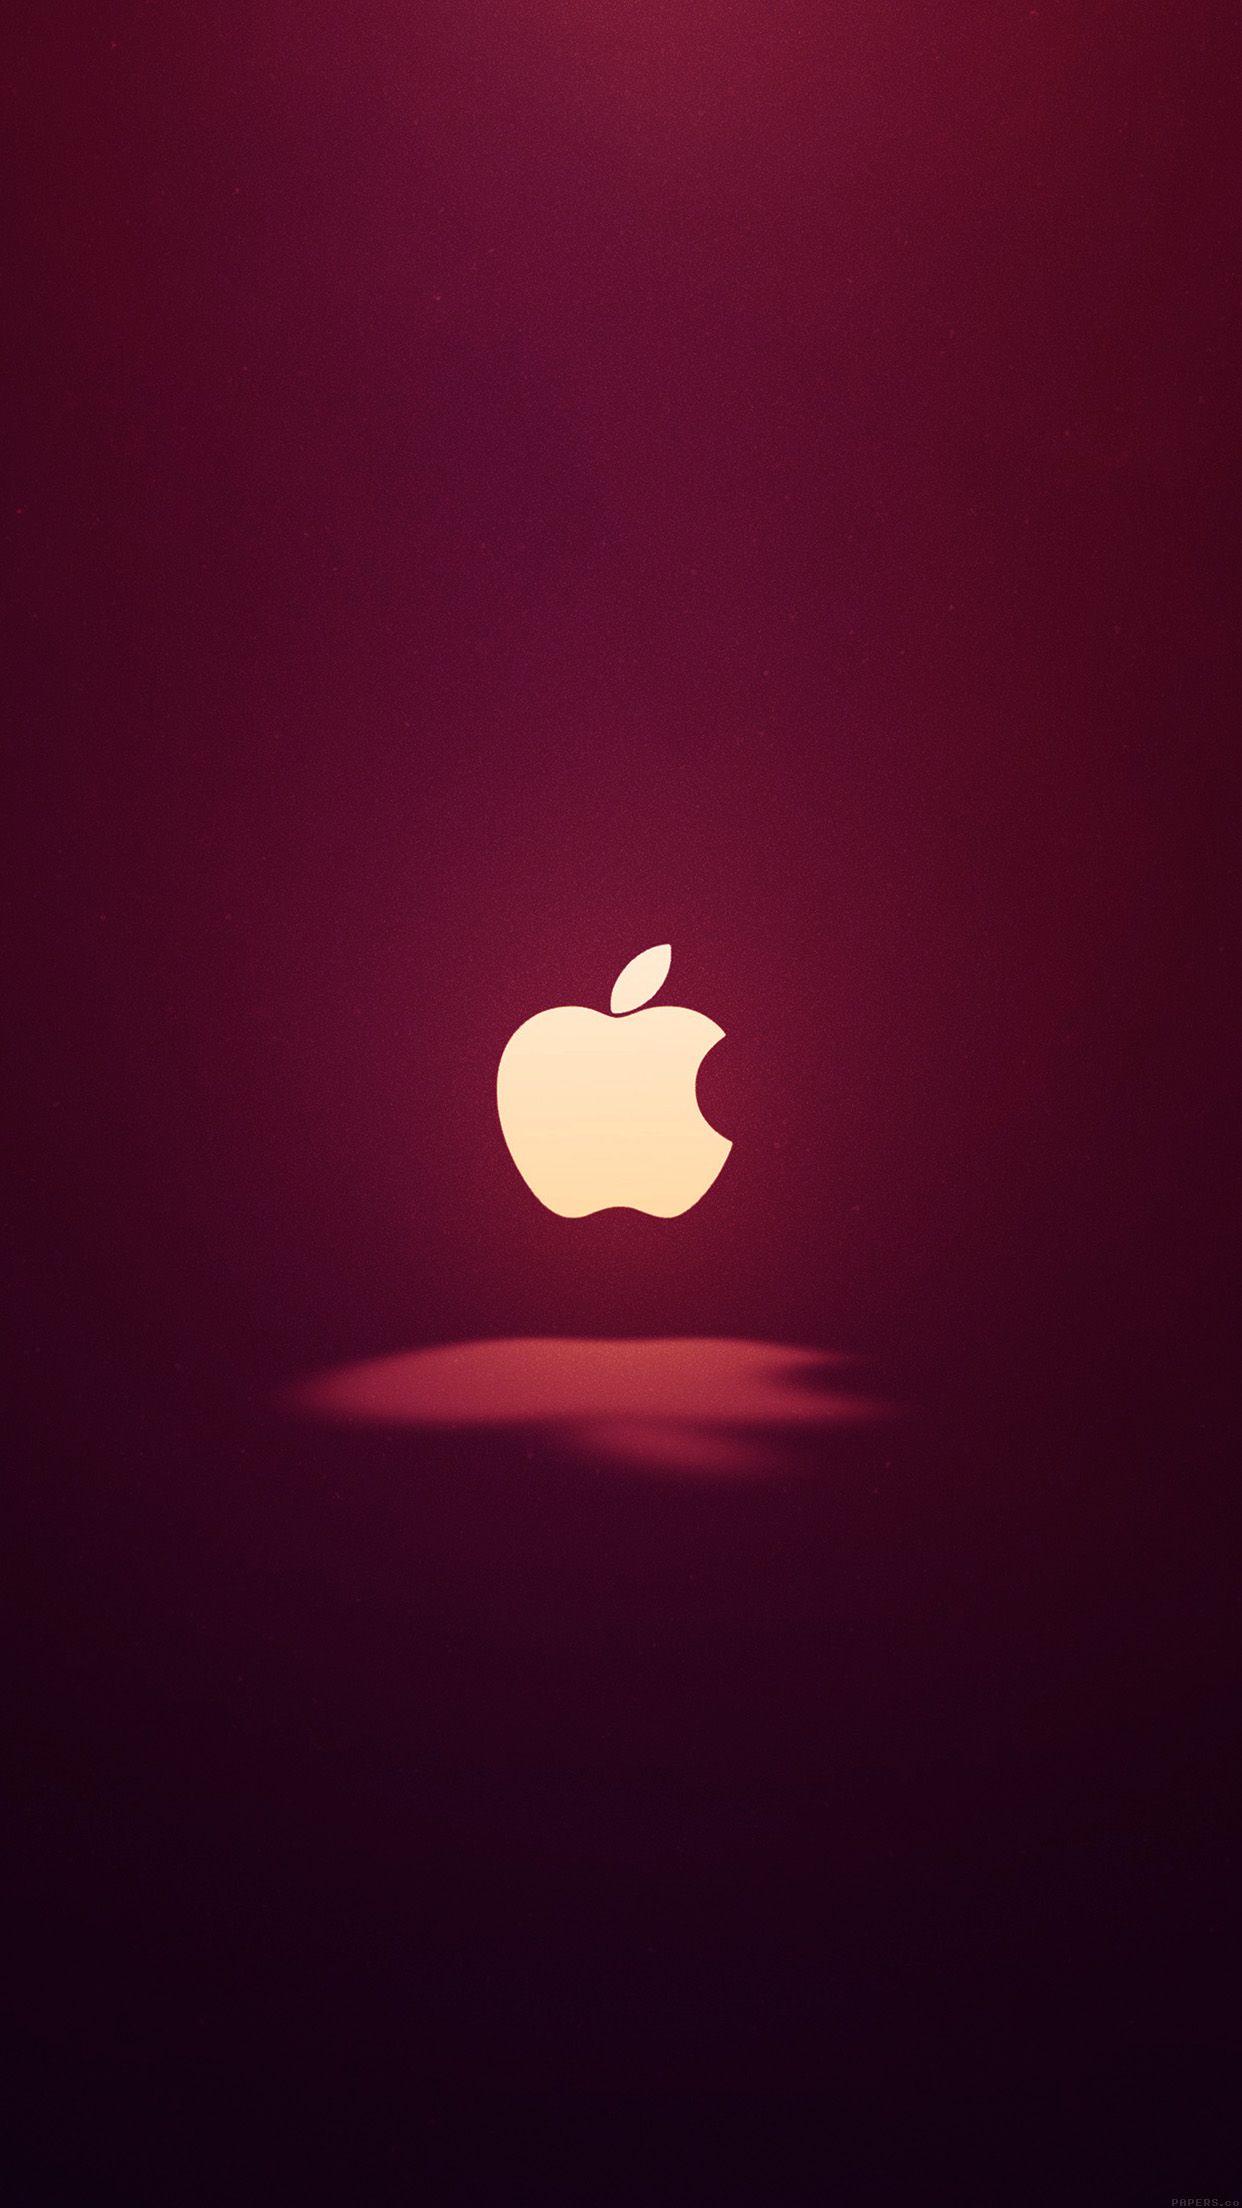 Supreme Apple Logo - Awesome Apple Logo Love Mania Wine Red Iphone6 Plus Wallpaper